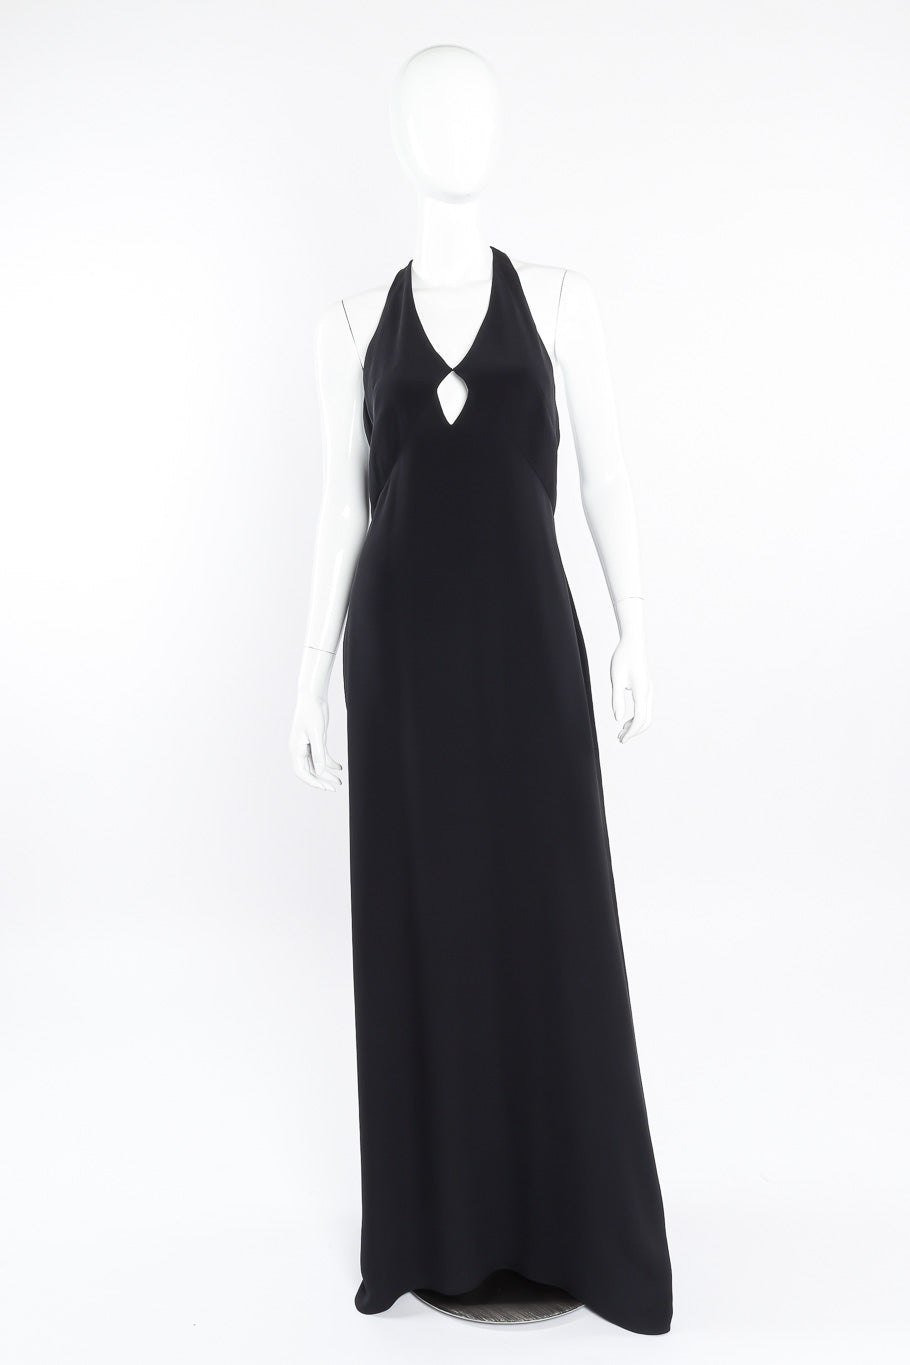 Valentino open back halter gown on full front view on mannequin @recessla